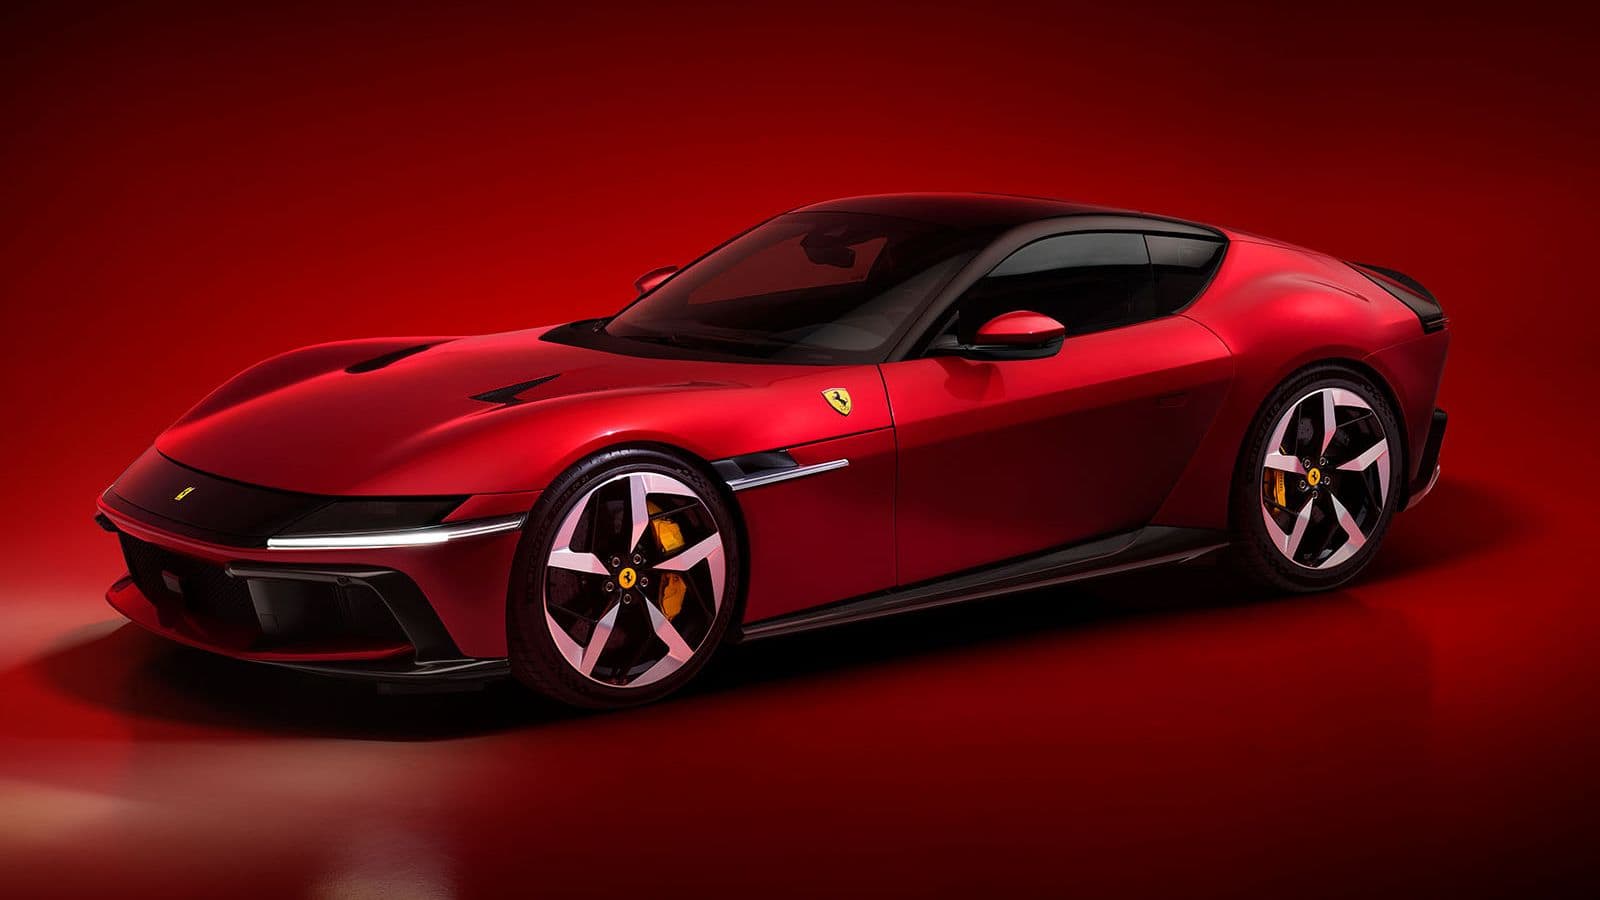 Ferrari unveils 12Cilindri, its most powerful pure-combustion car yet